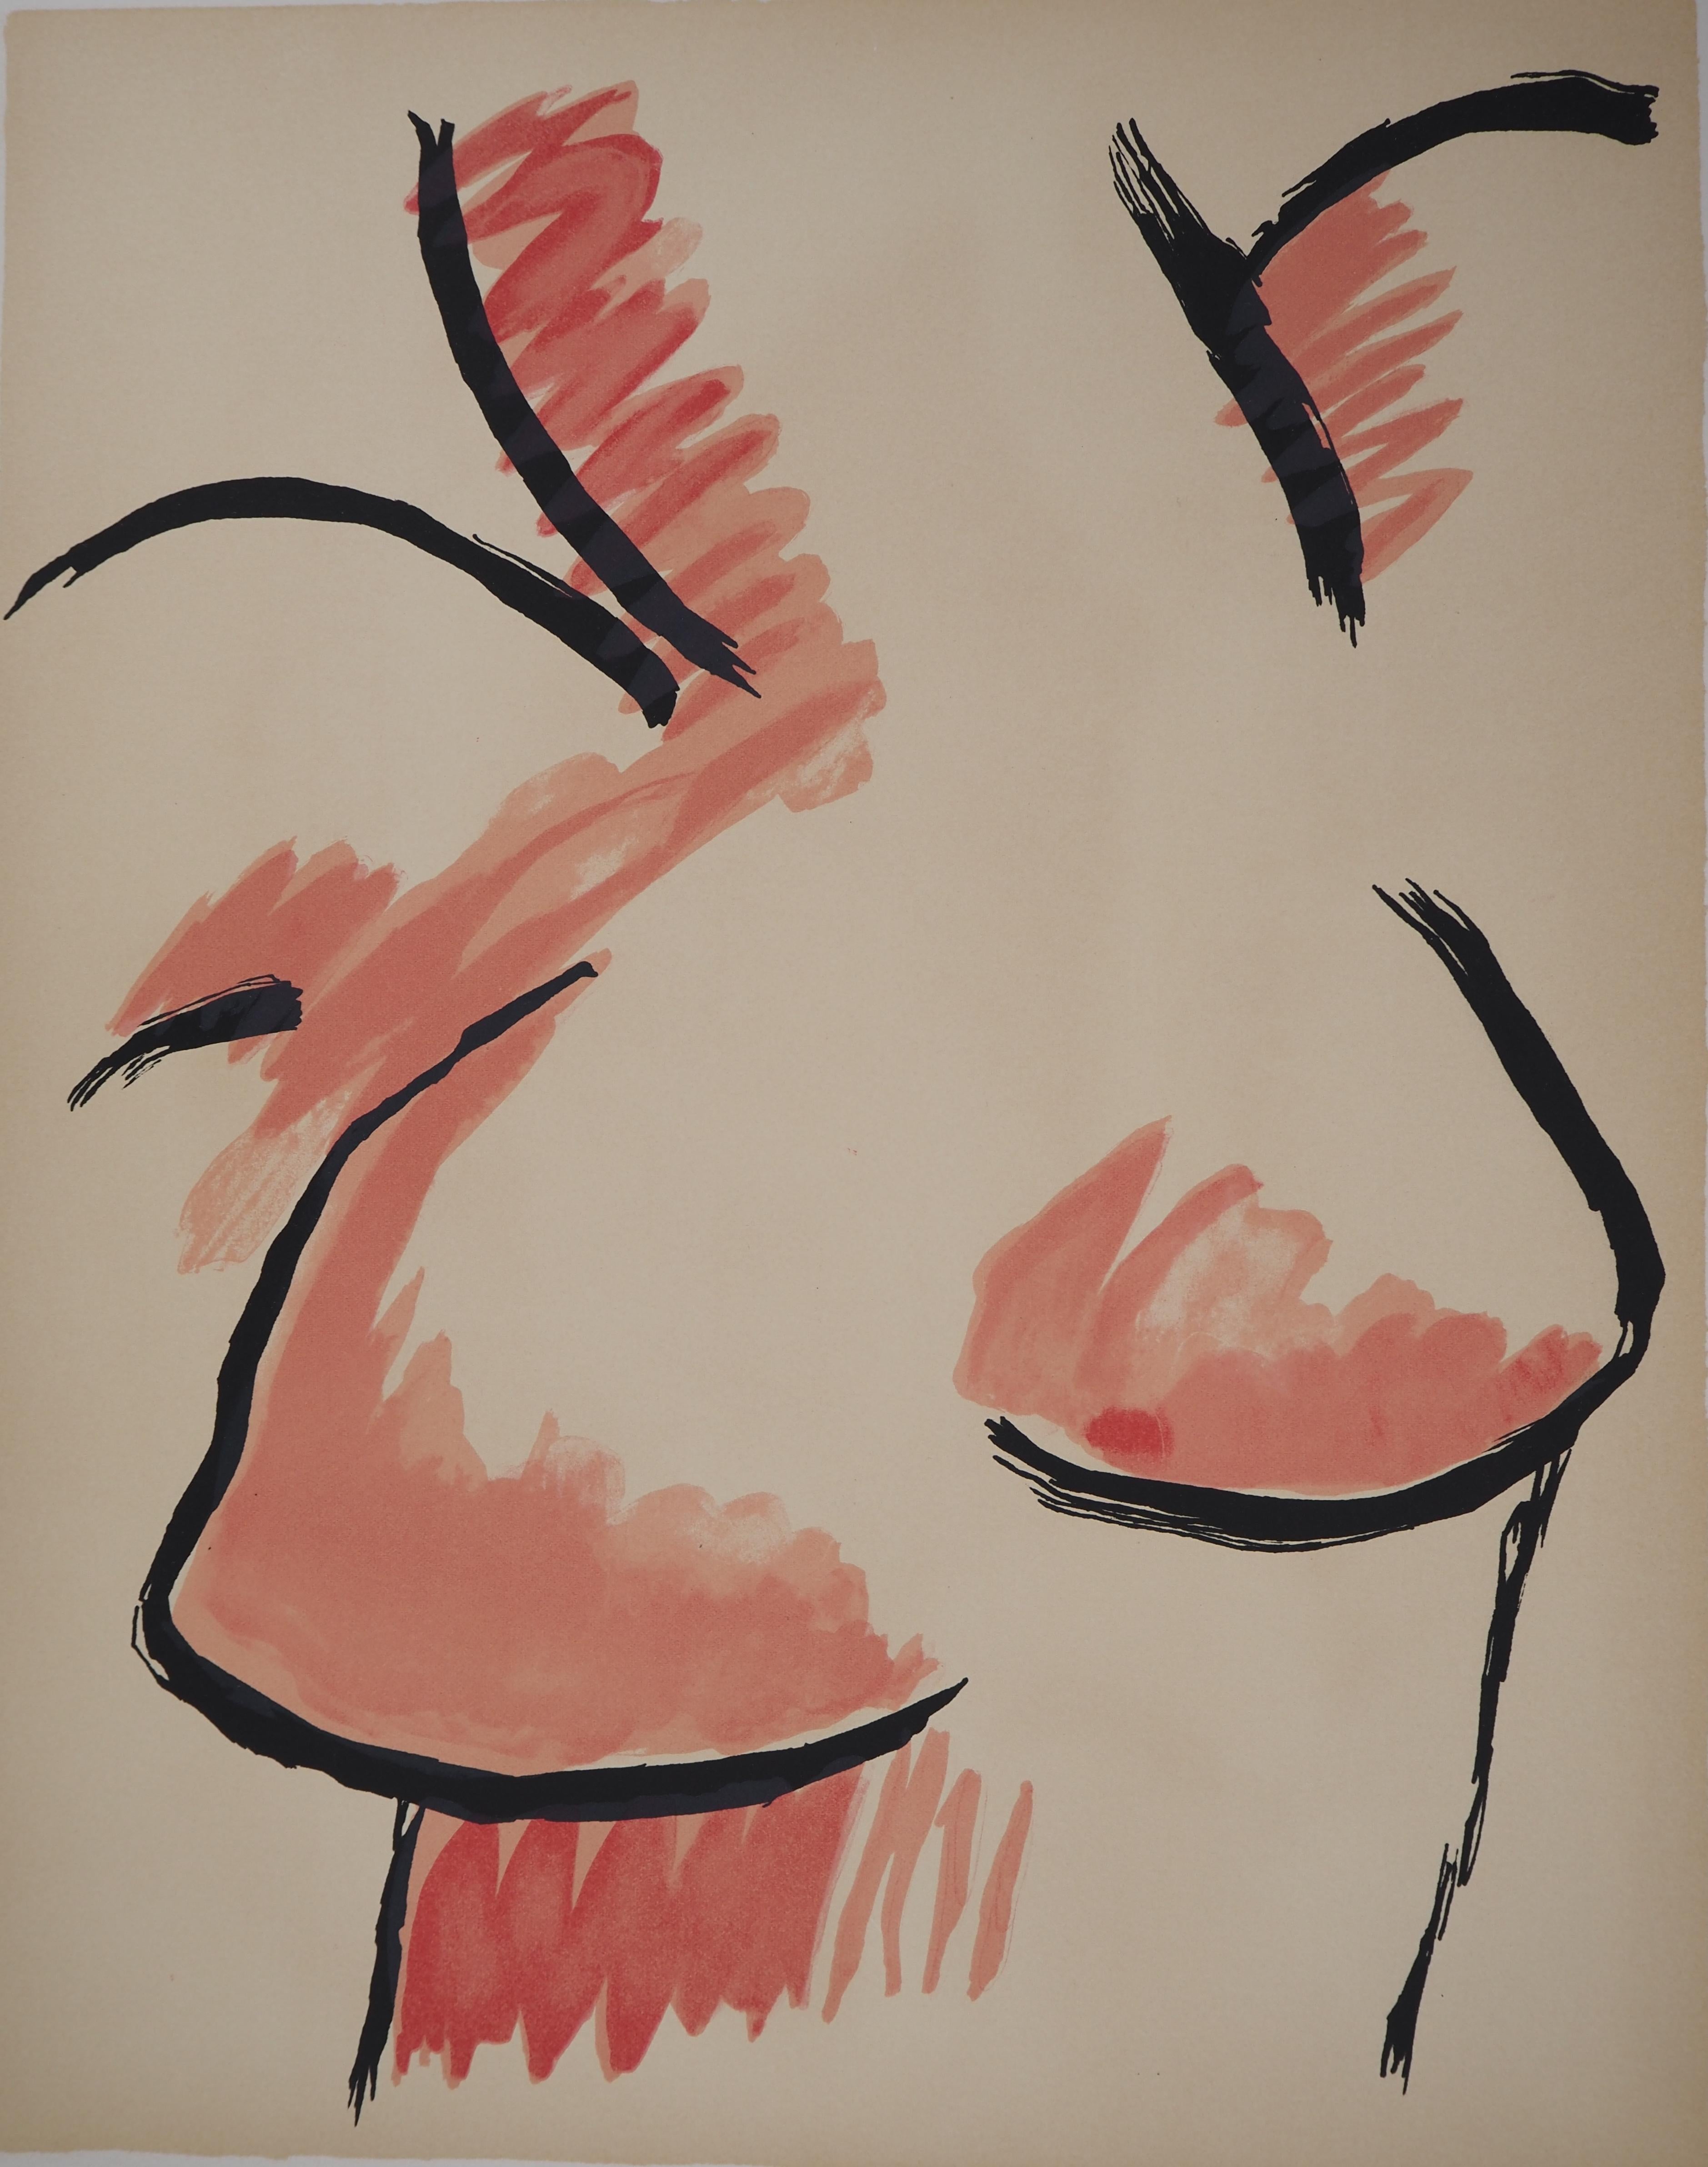 Female Bust - Handsigned Original Lithograph (Anselmino #58) - Surrealist Print by Man Ray